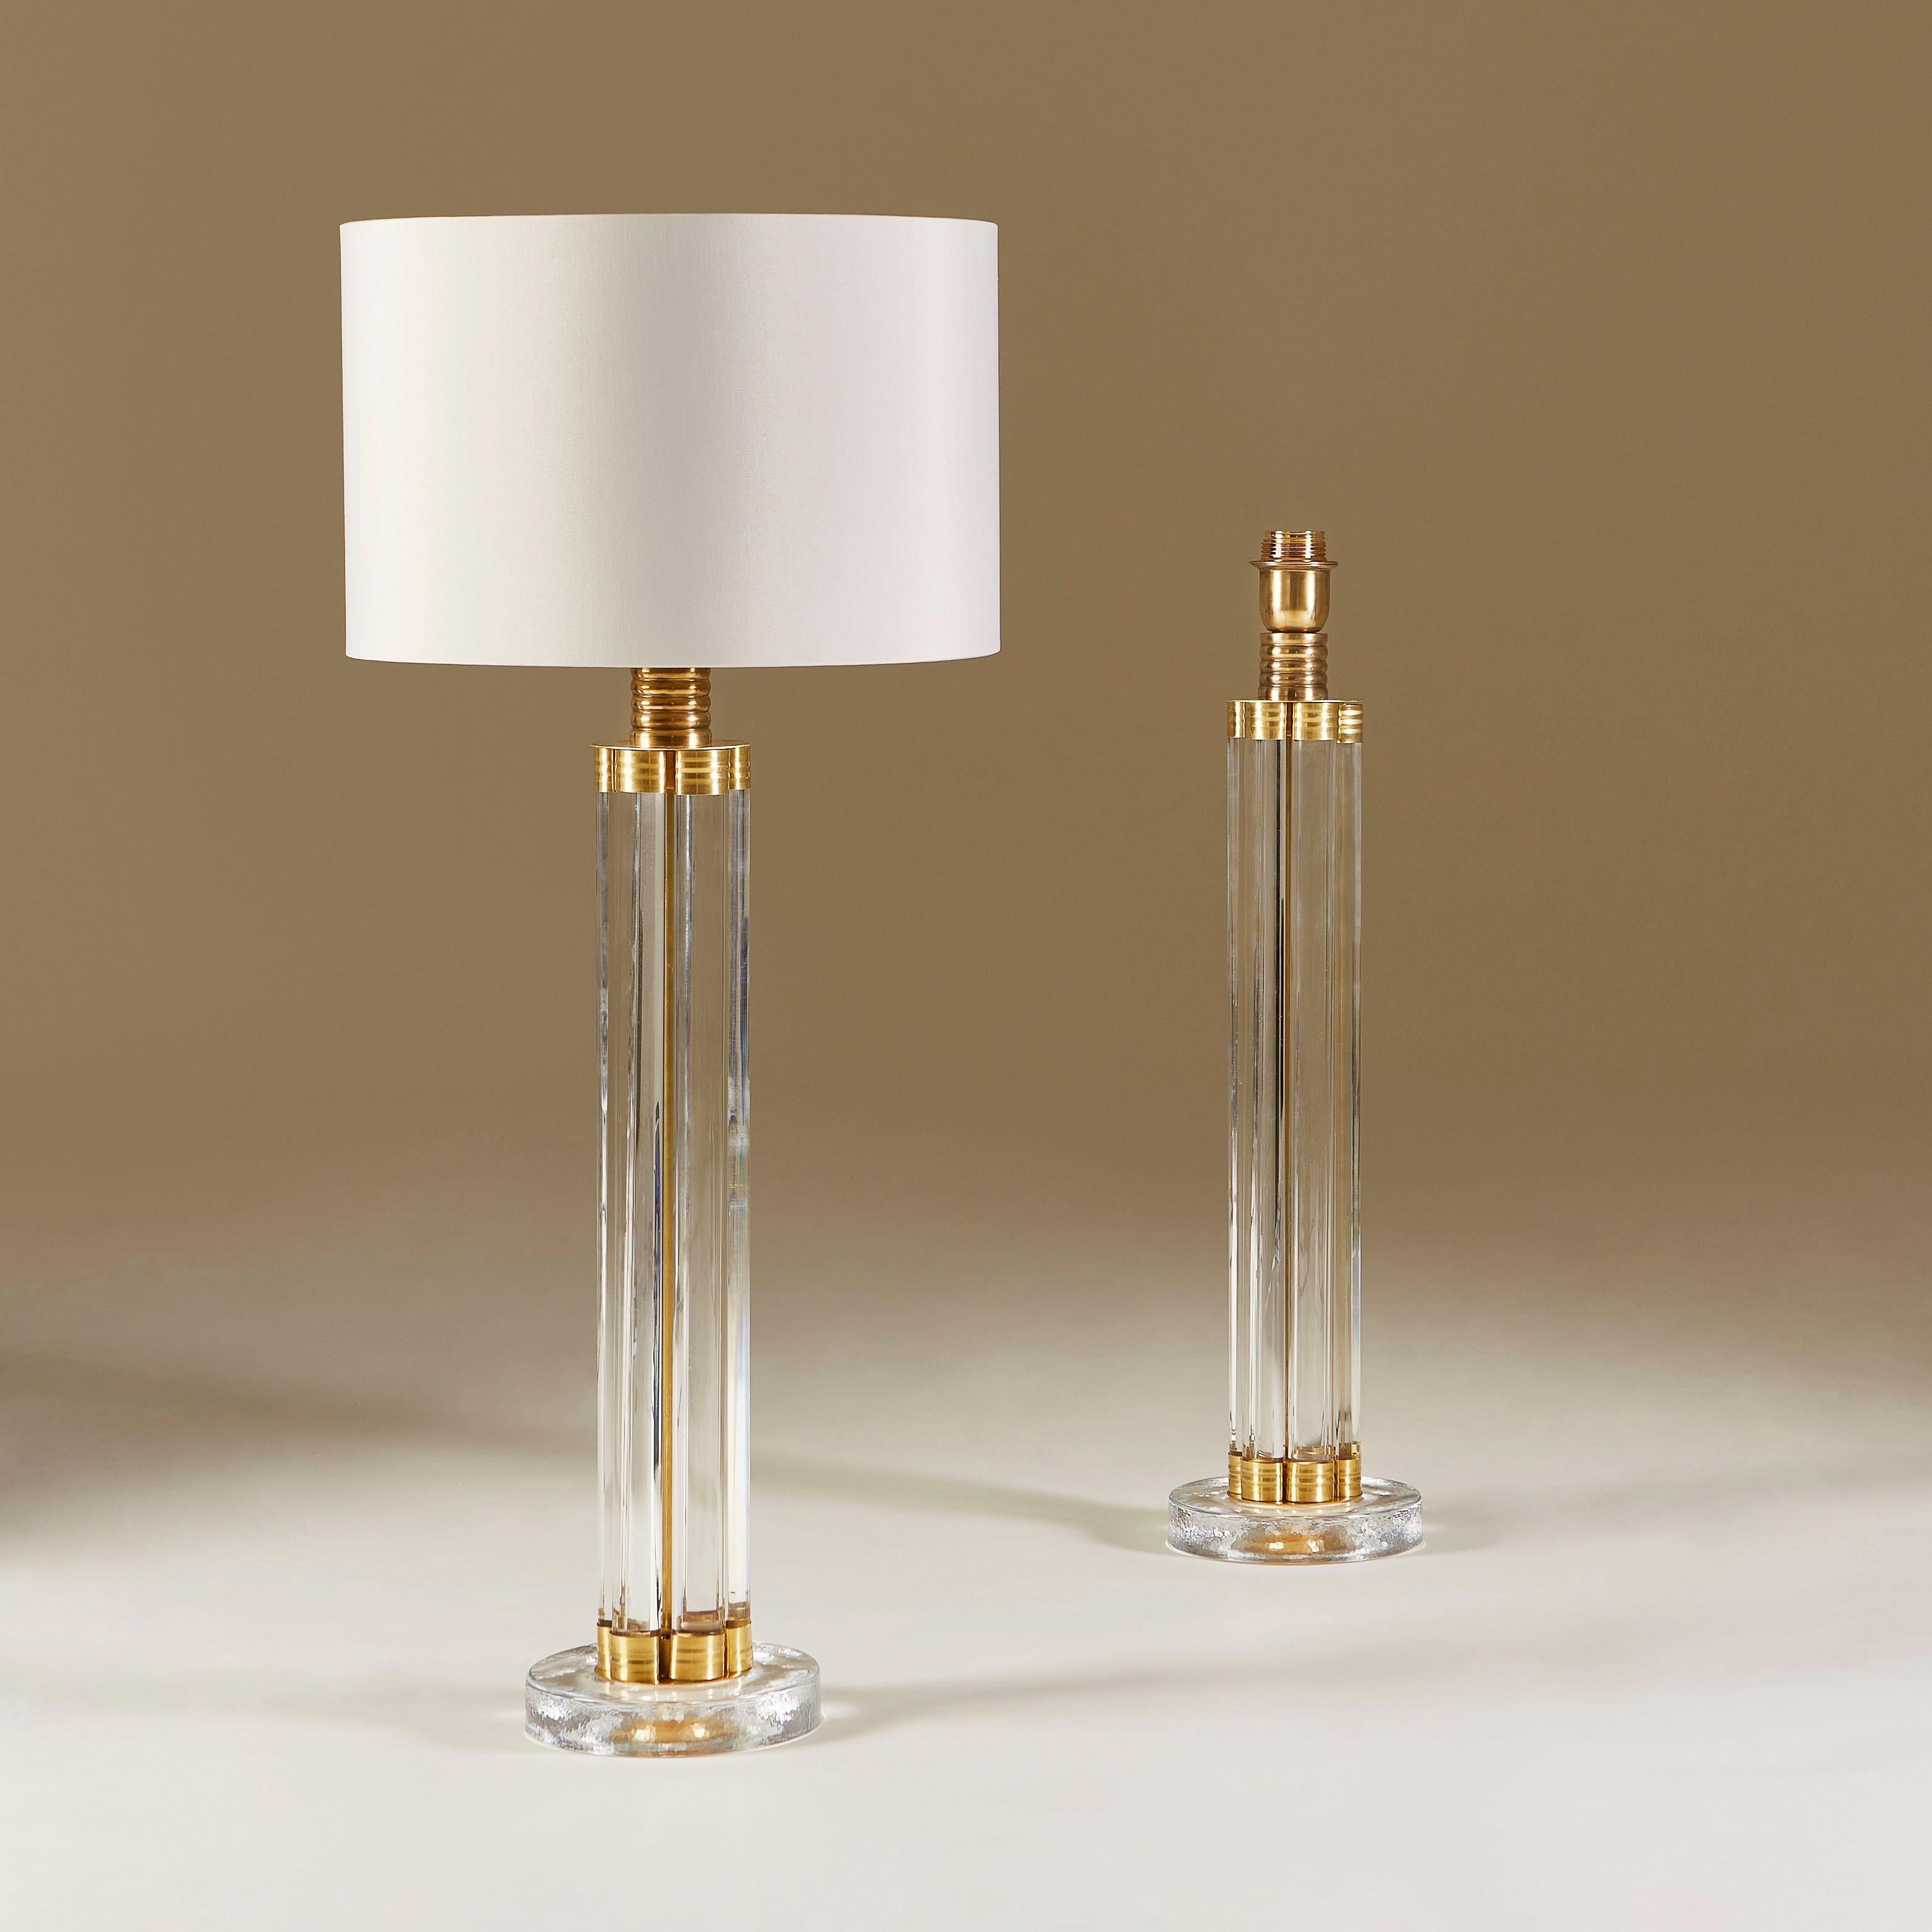 Striking contemporary pair of table lamps each made of six vertical glass rods held together at the top and bottom with decorative brass elements, standing on heavy square glass bases with rounded edges.